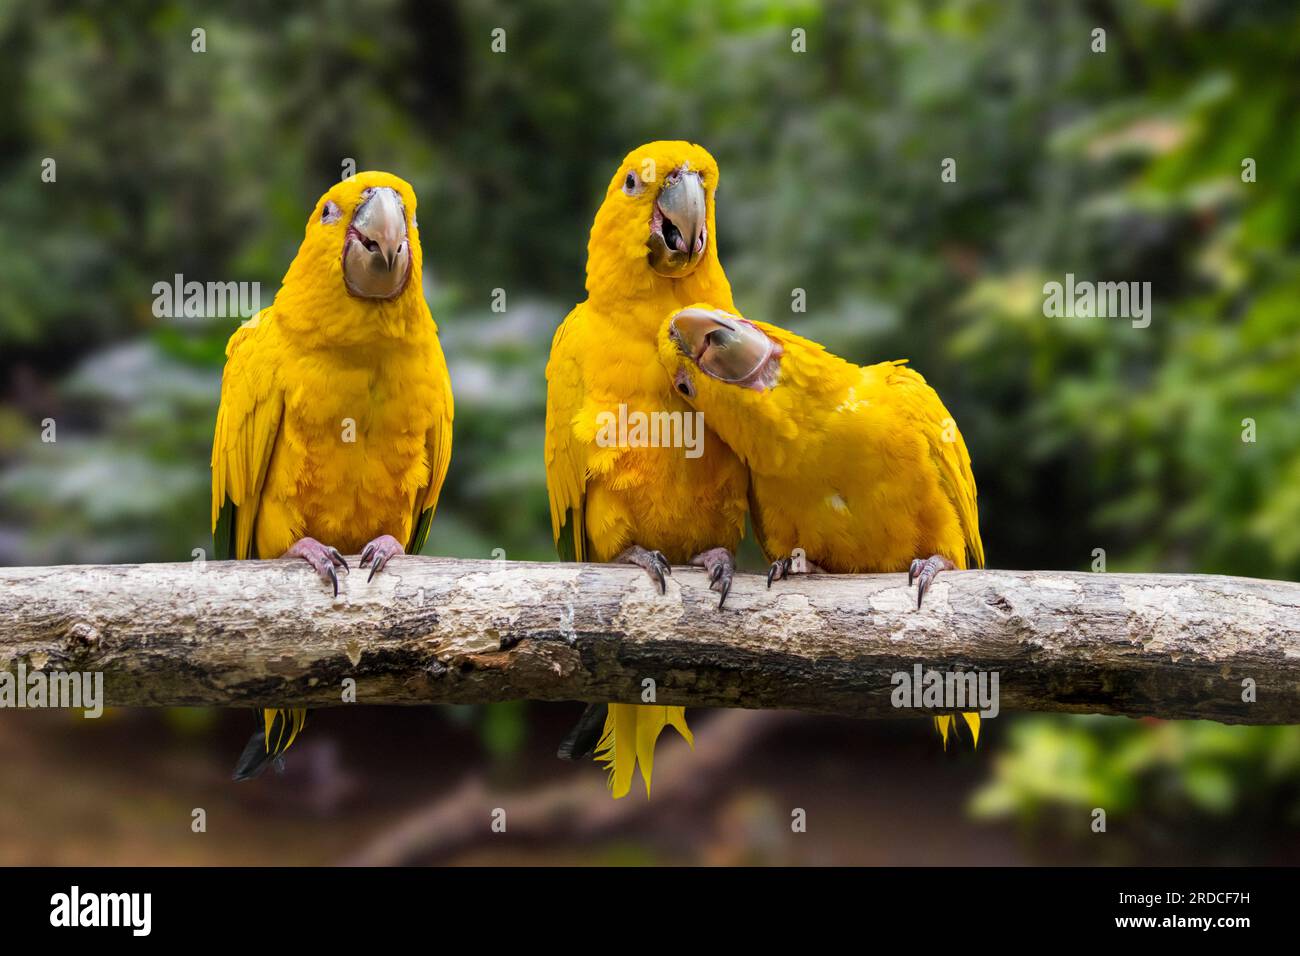 Three golden parakeets / golden conures (Guaruba guarouba) perched in tree, Neotropical parrot native to the Amazon Basin of interior northern Brazil Stock Photo